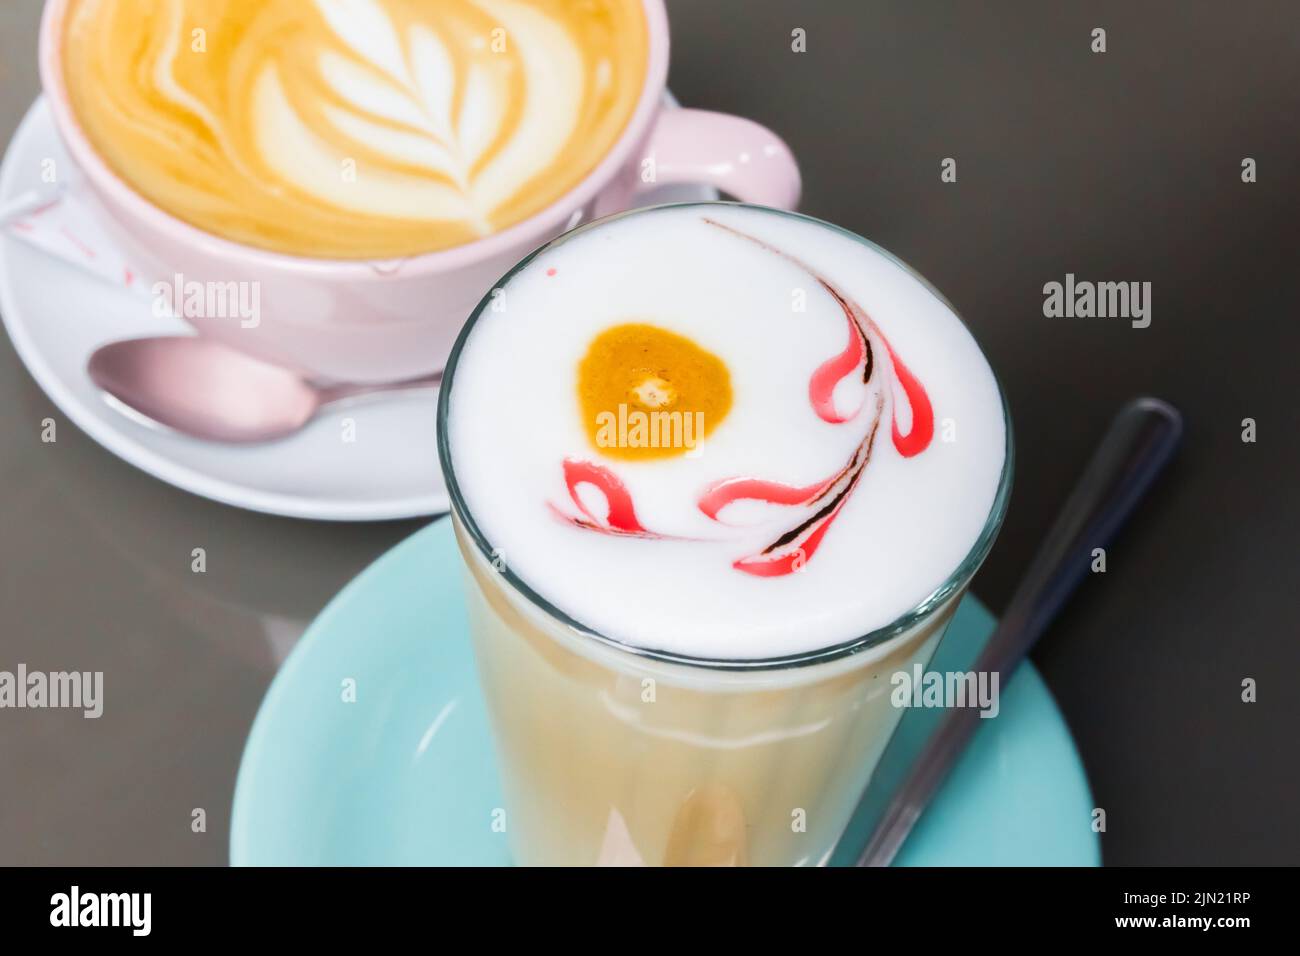 Glass of latte macchiato and a cup of cappuccino with decorated foam Stock Photo